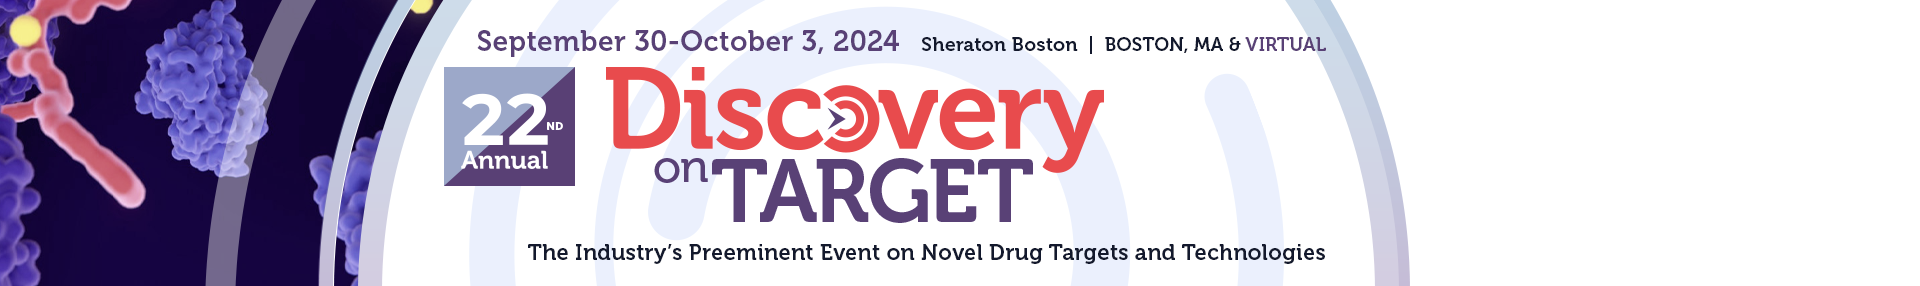 Discovery on Target 2024